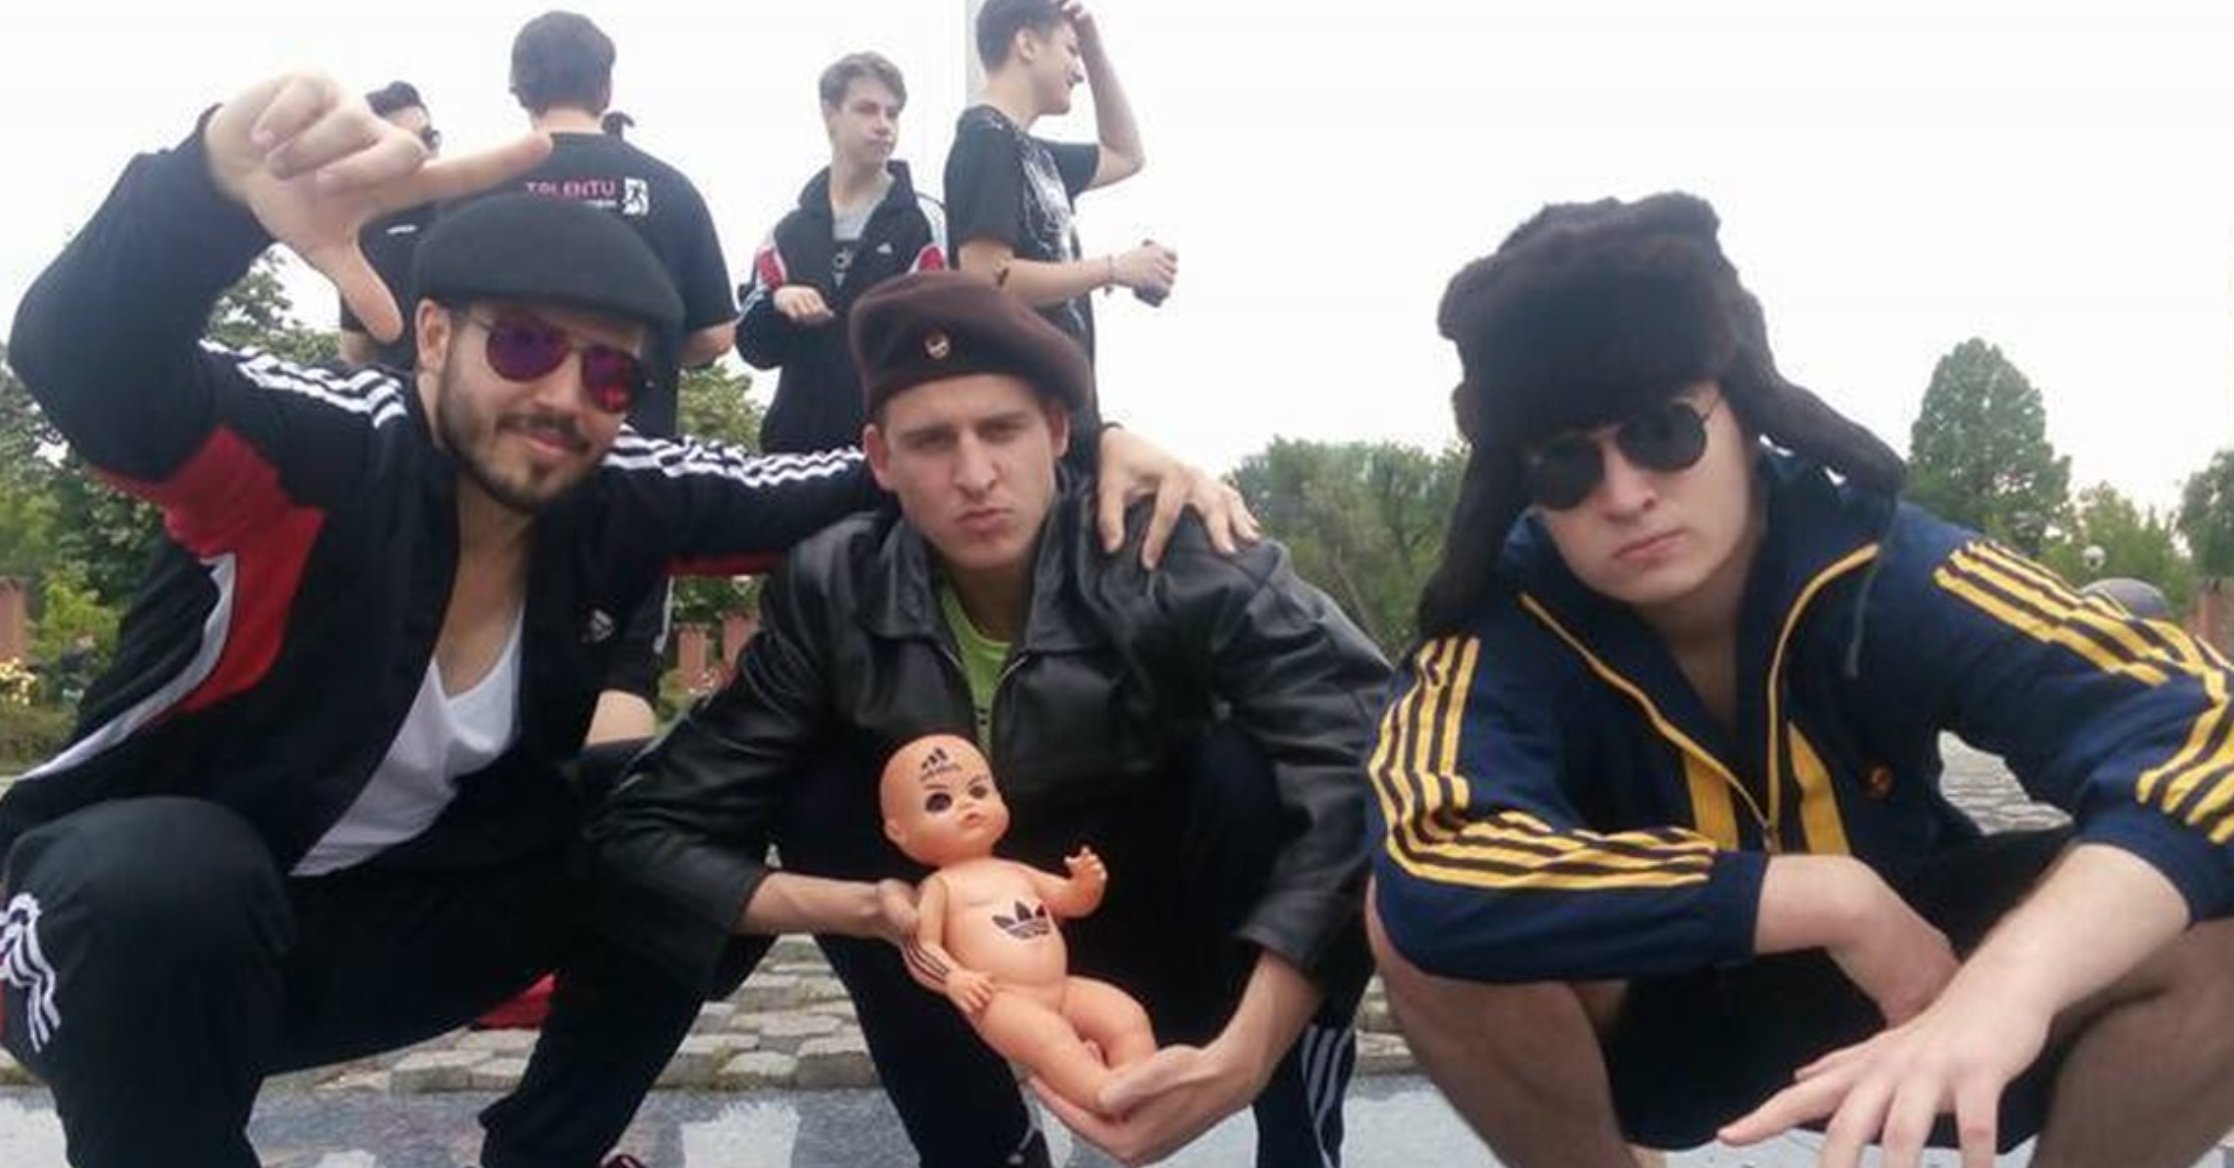 ✍️ Andrew D. Kaufman, on Twitter: "Squatting Slavs: to be true Slav one must learn how to do this: Meet the Romanian Teen Behind Cult Facebook Page, "Squatting Slavs in Tracksuits"